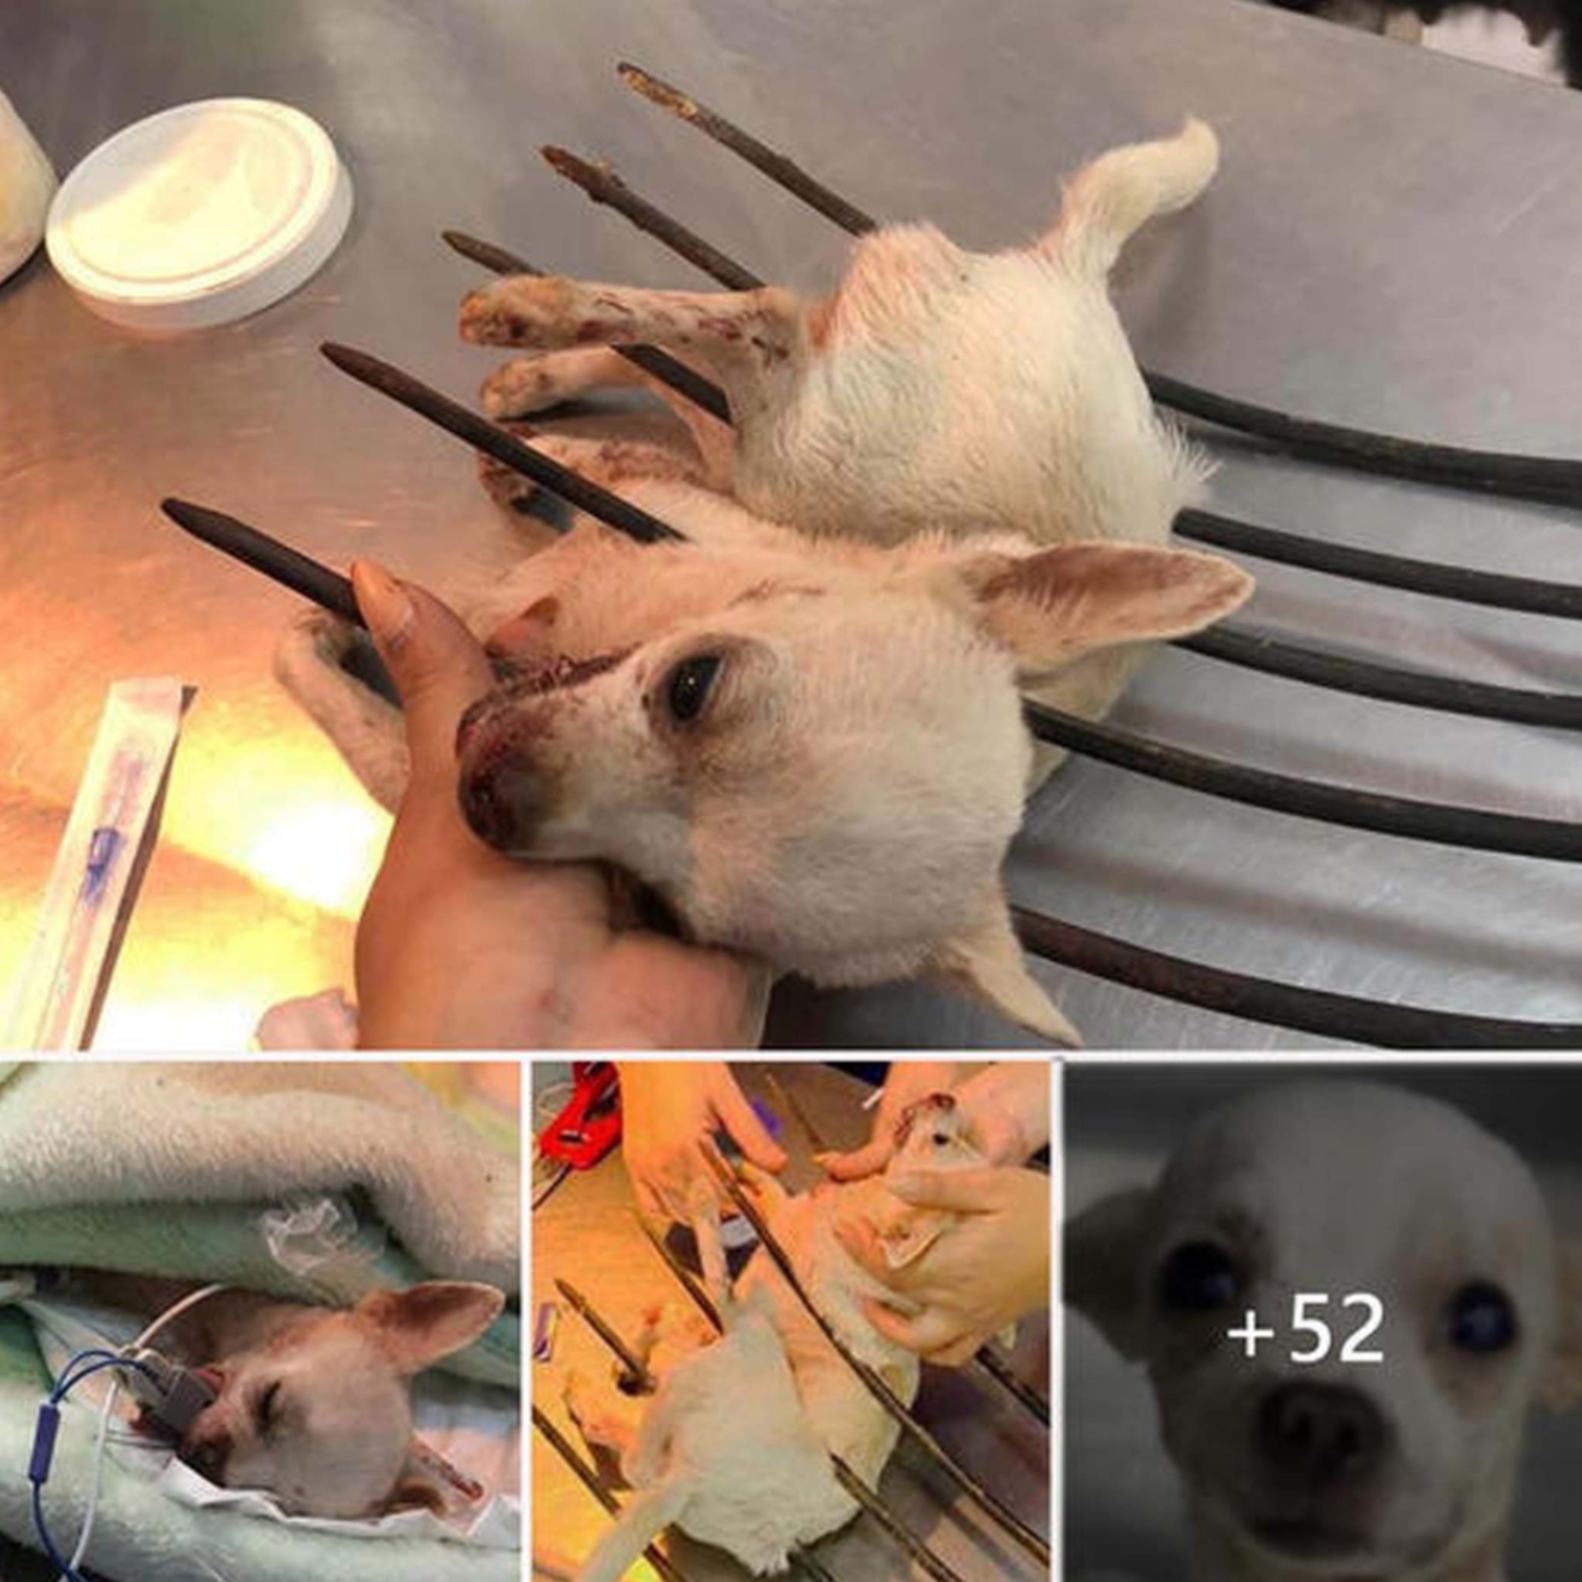 The unfortunate little dog was hit by a rake, no one thought he could survive, but the help and strong will in the little body regained his life and the real miracle came.